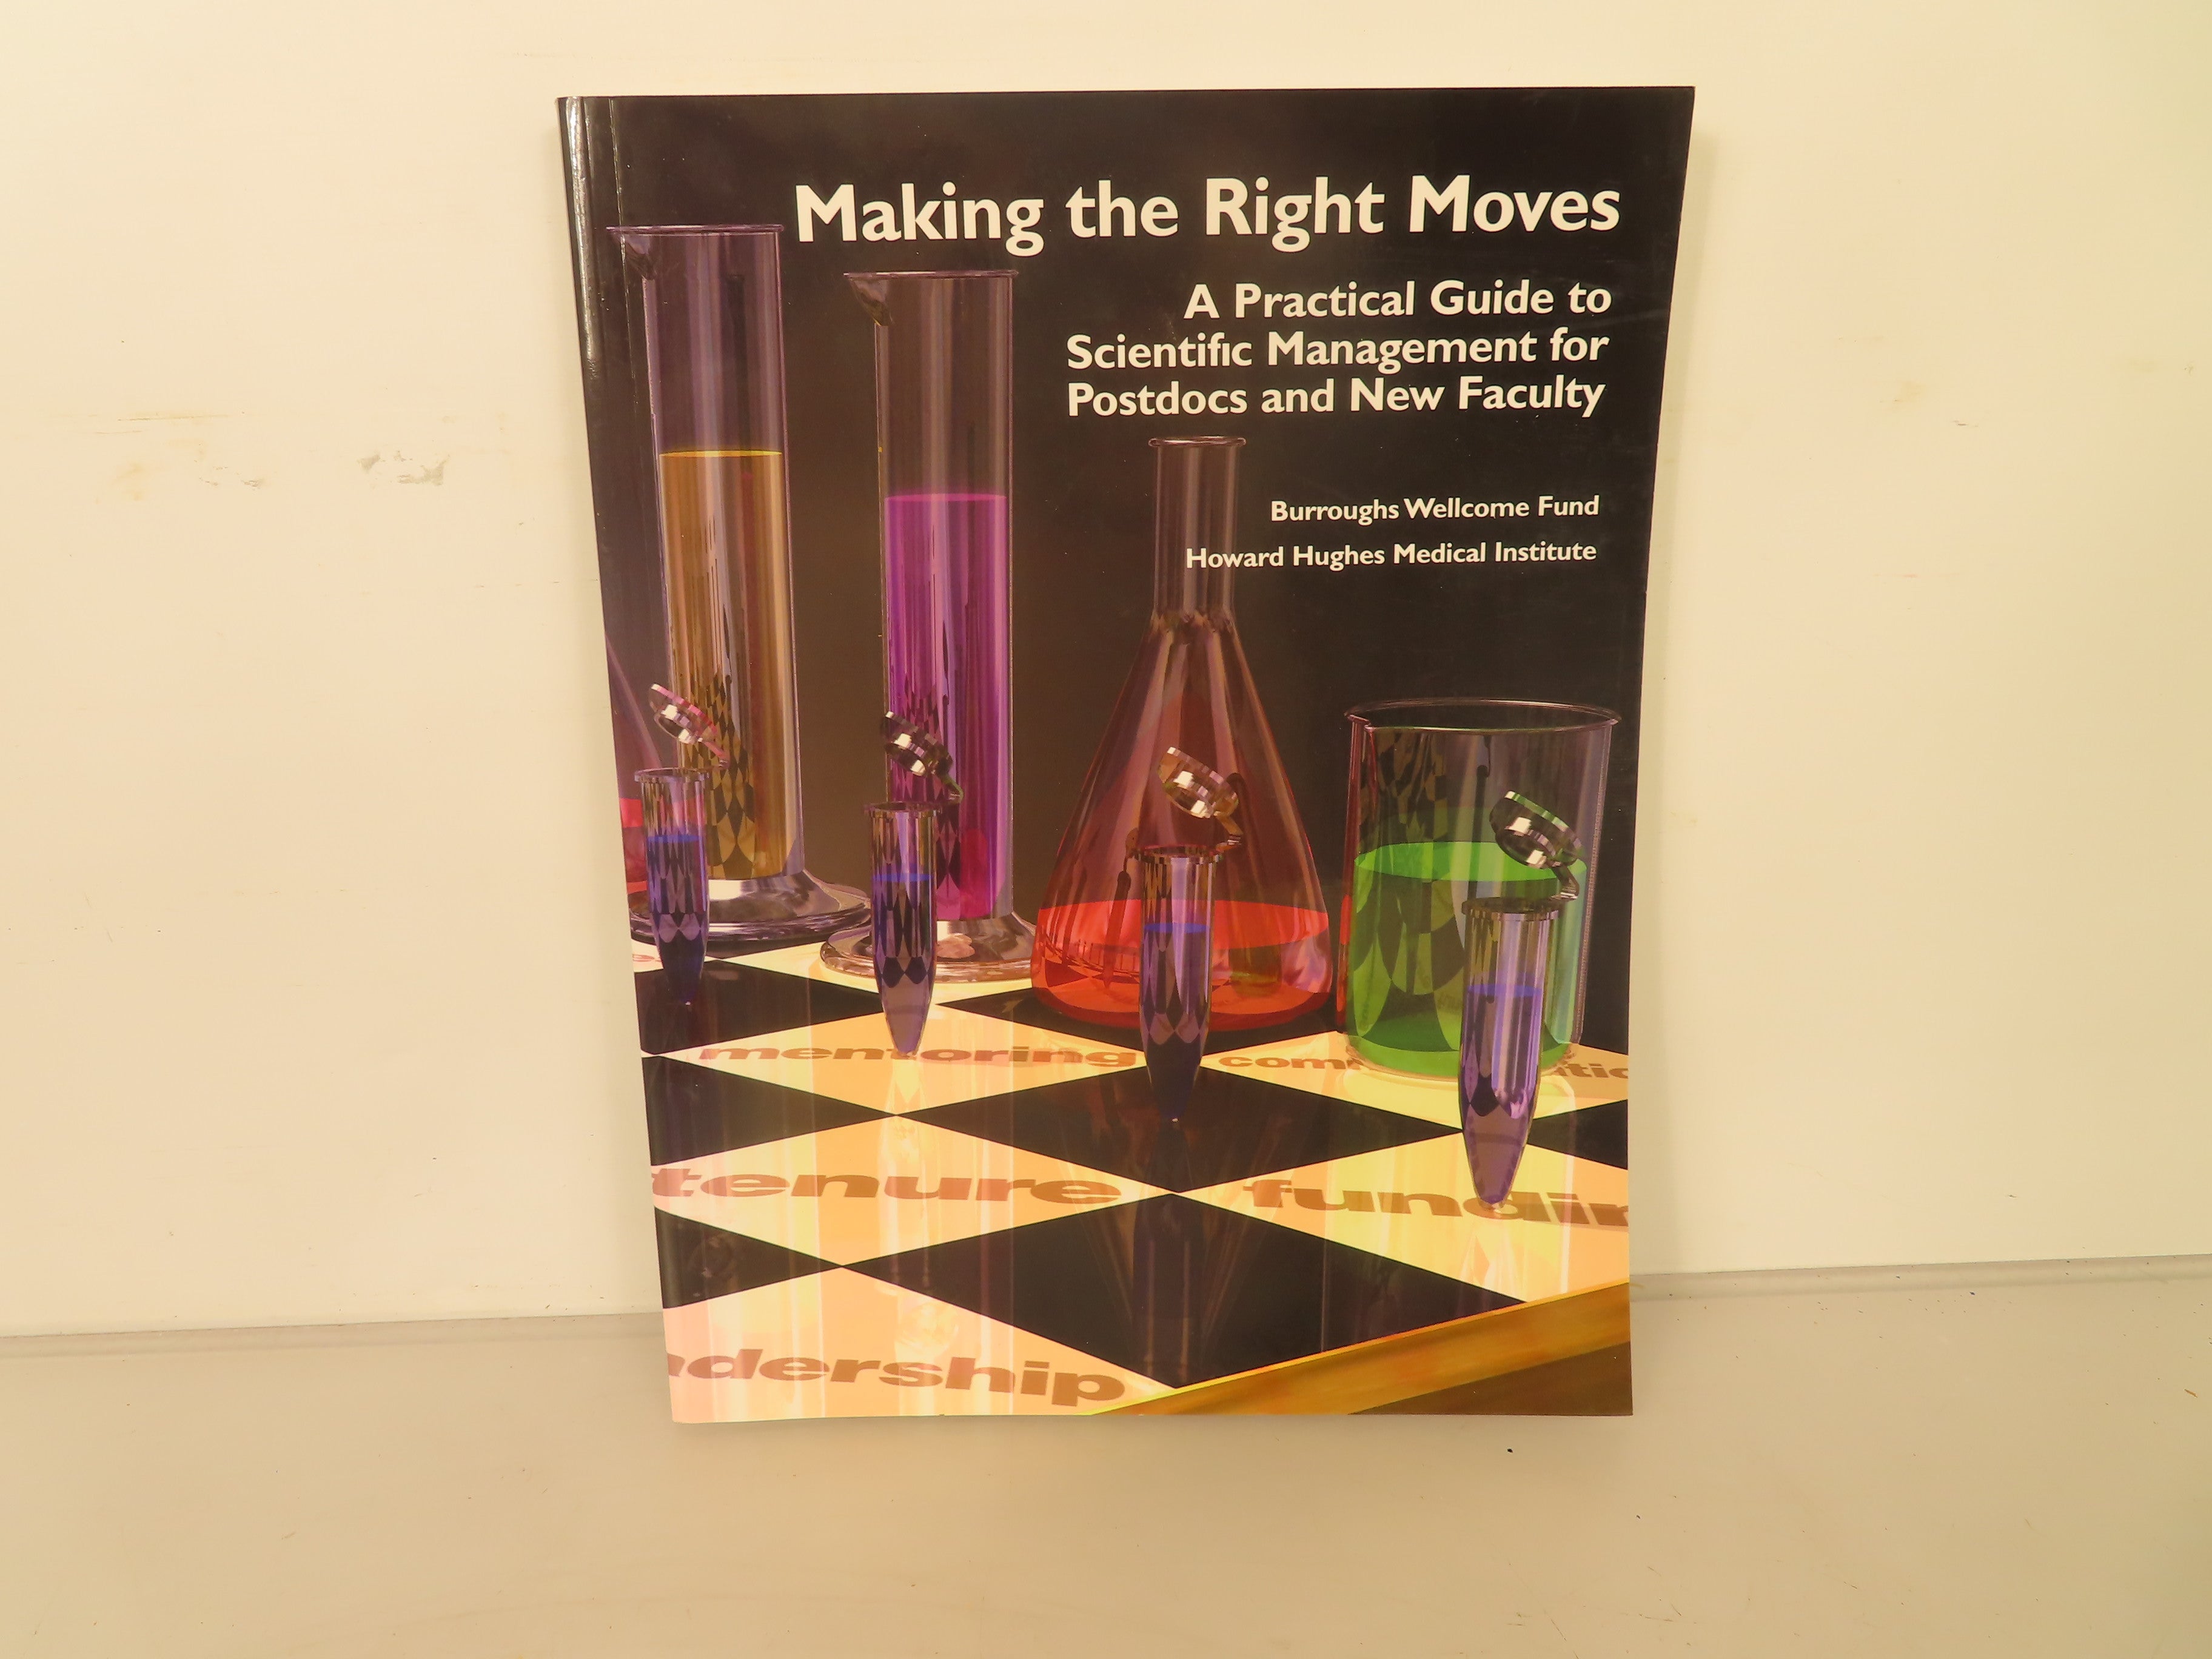 Making the Right Moves A Practical Guide to Scientific Management for Postdocs and New Faculty 2004